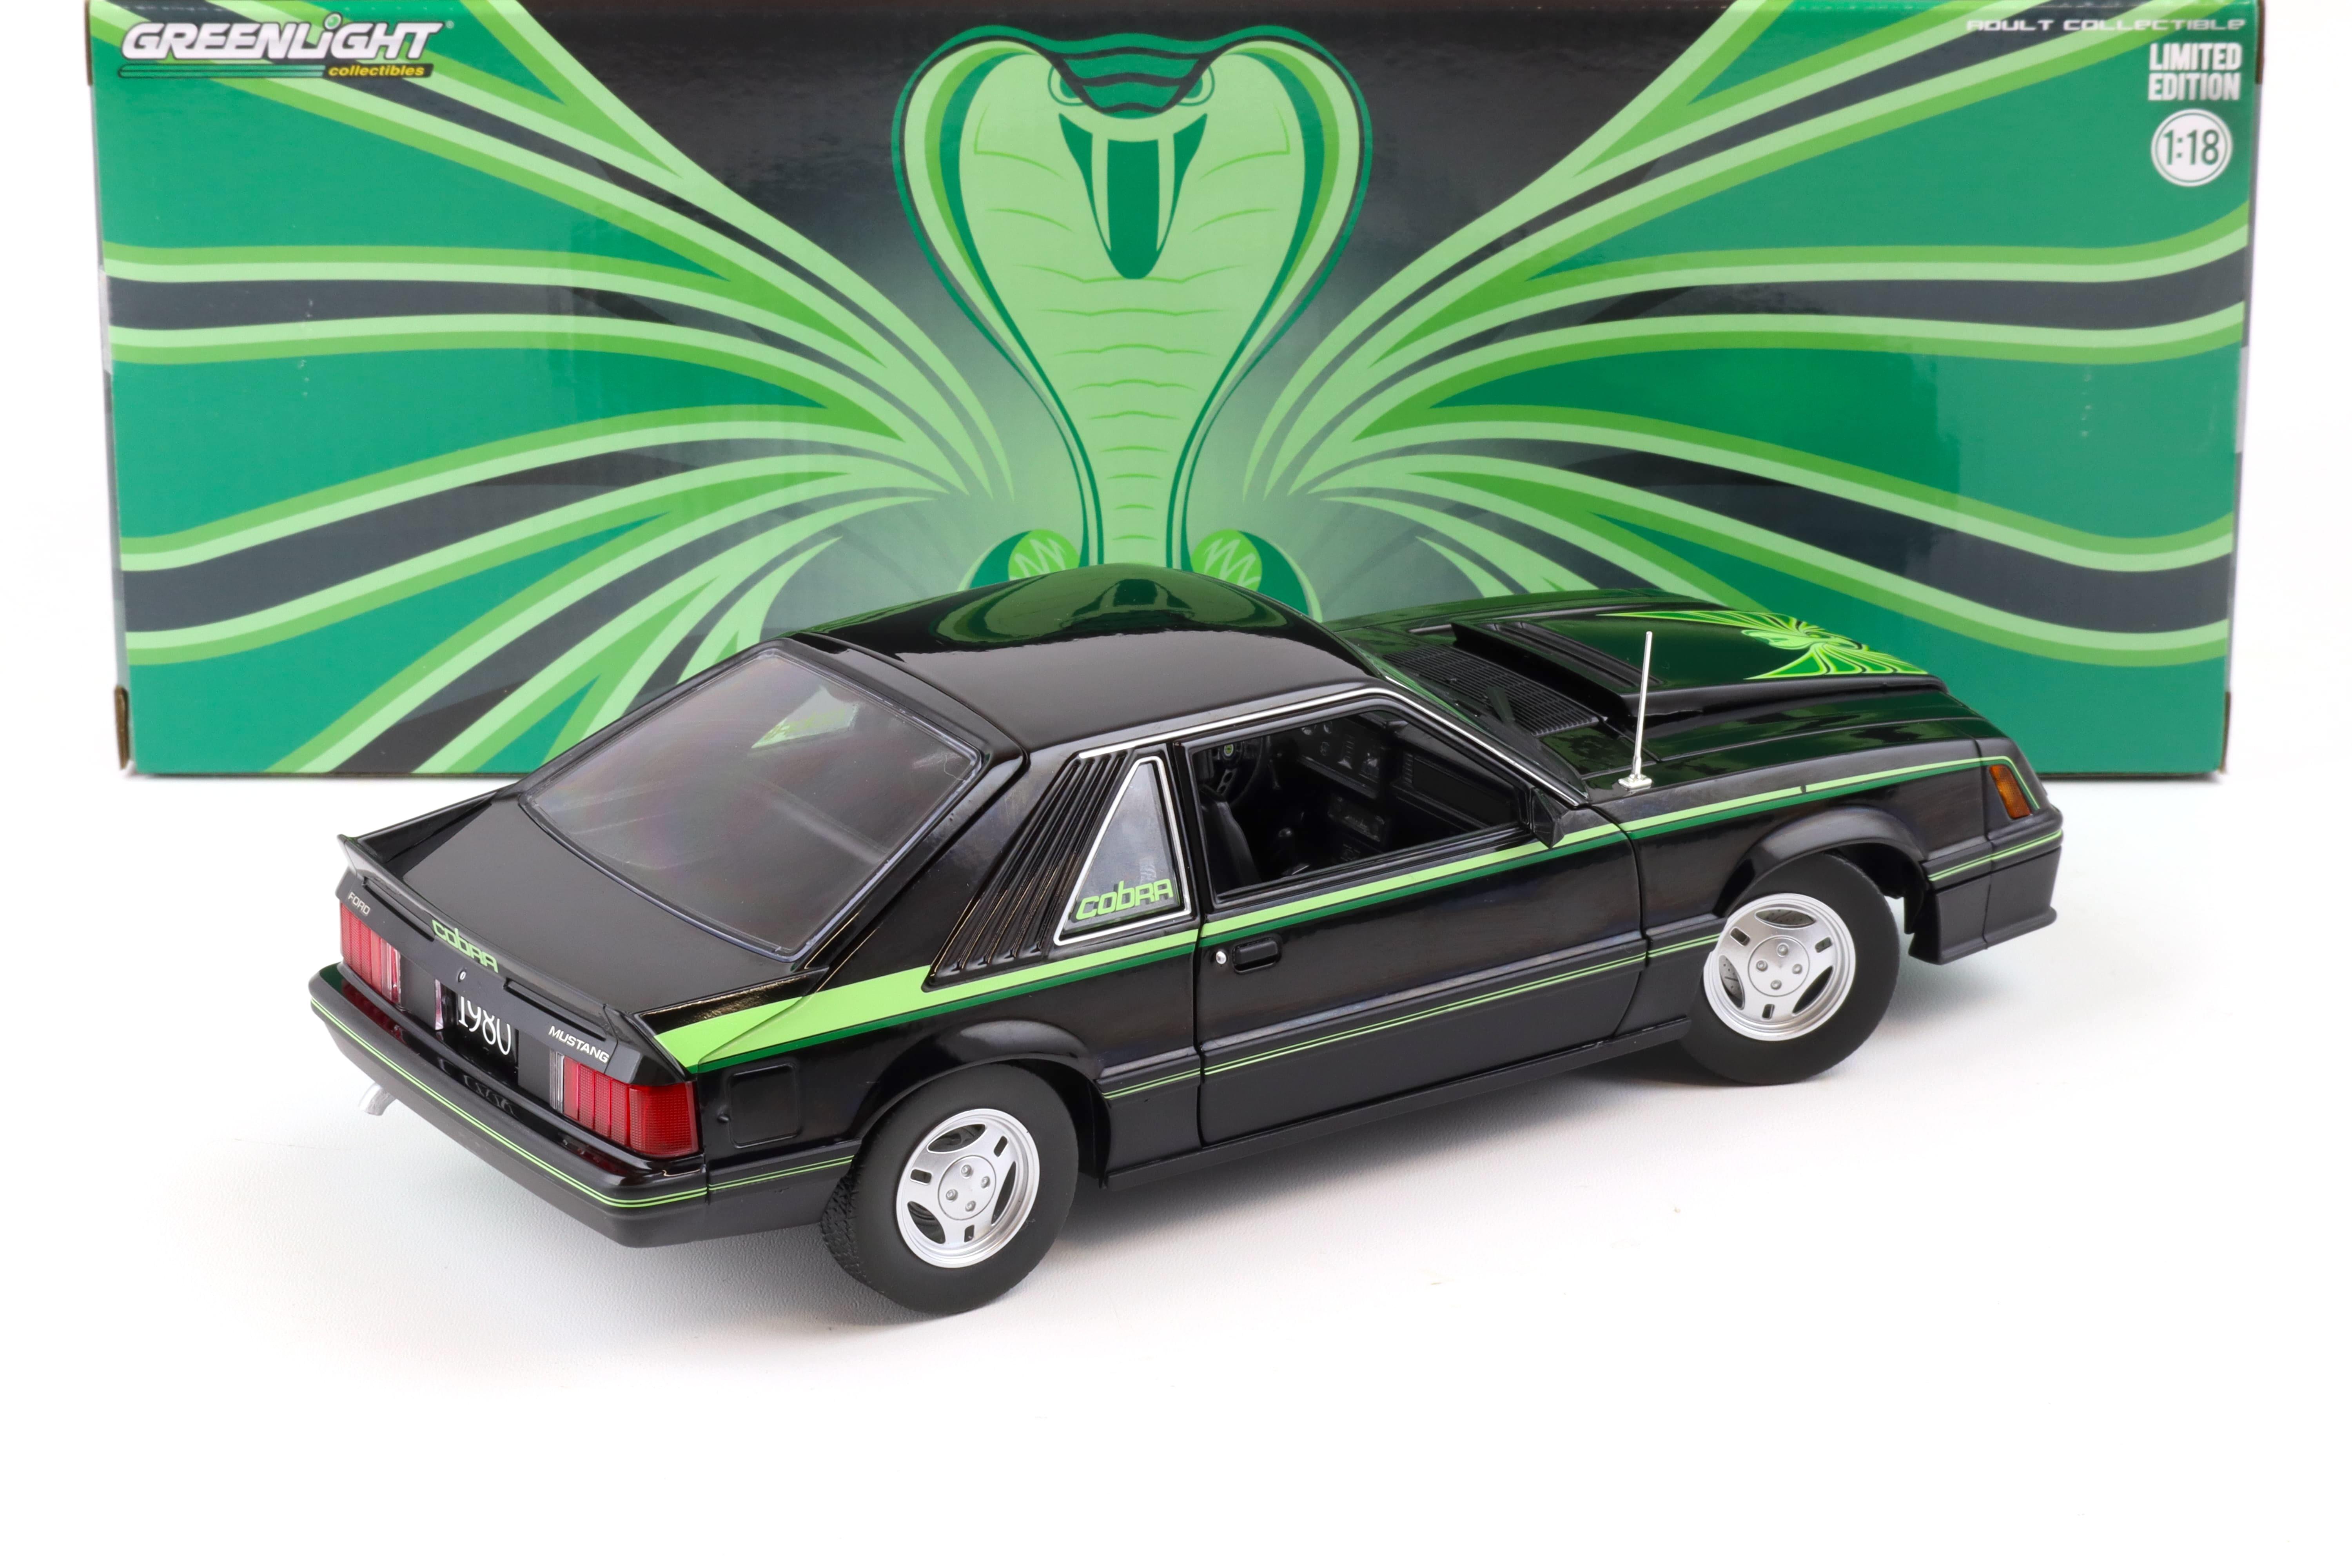 1:18 Greenlight 1980 Ford Mustang Cobra Coupe black/ green